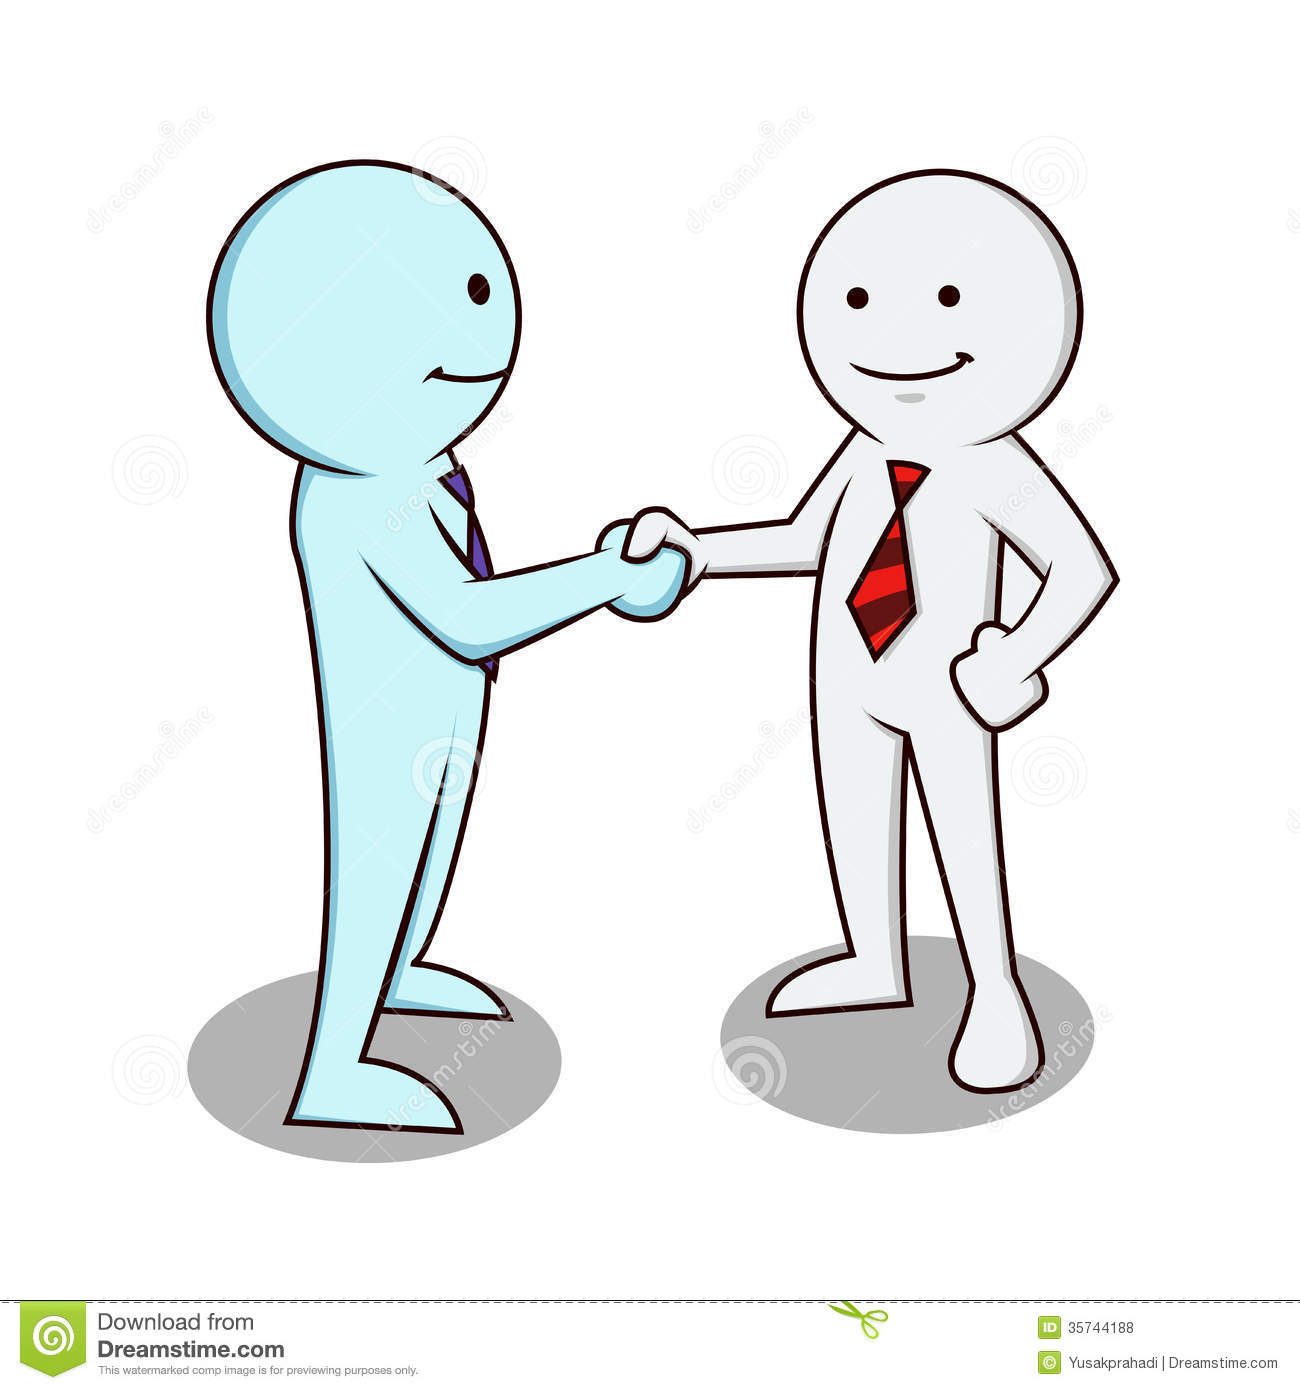 Business Man Shaking Hands Royalty Free Stock Photos   Image  35744188